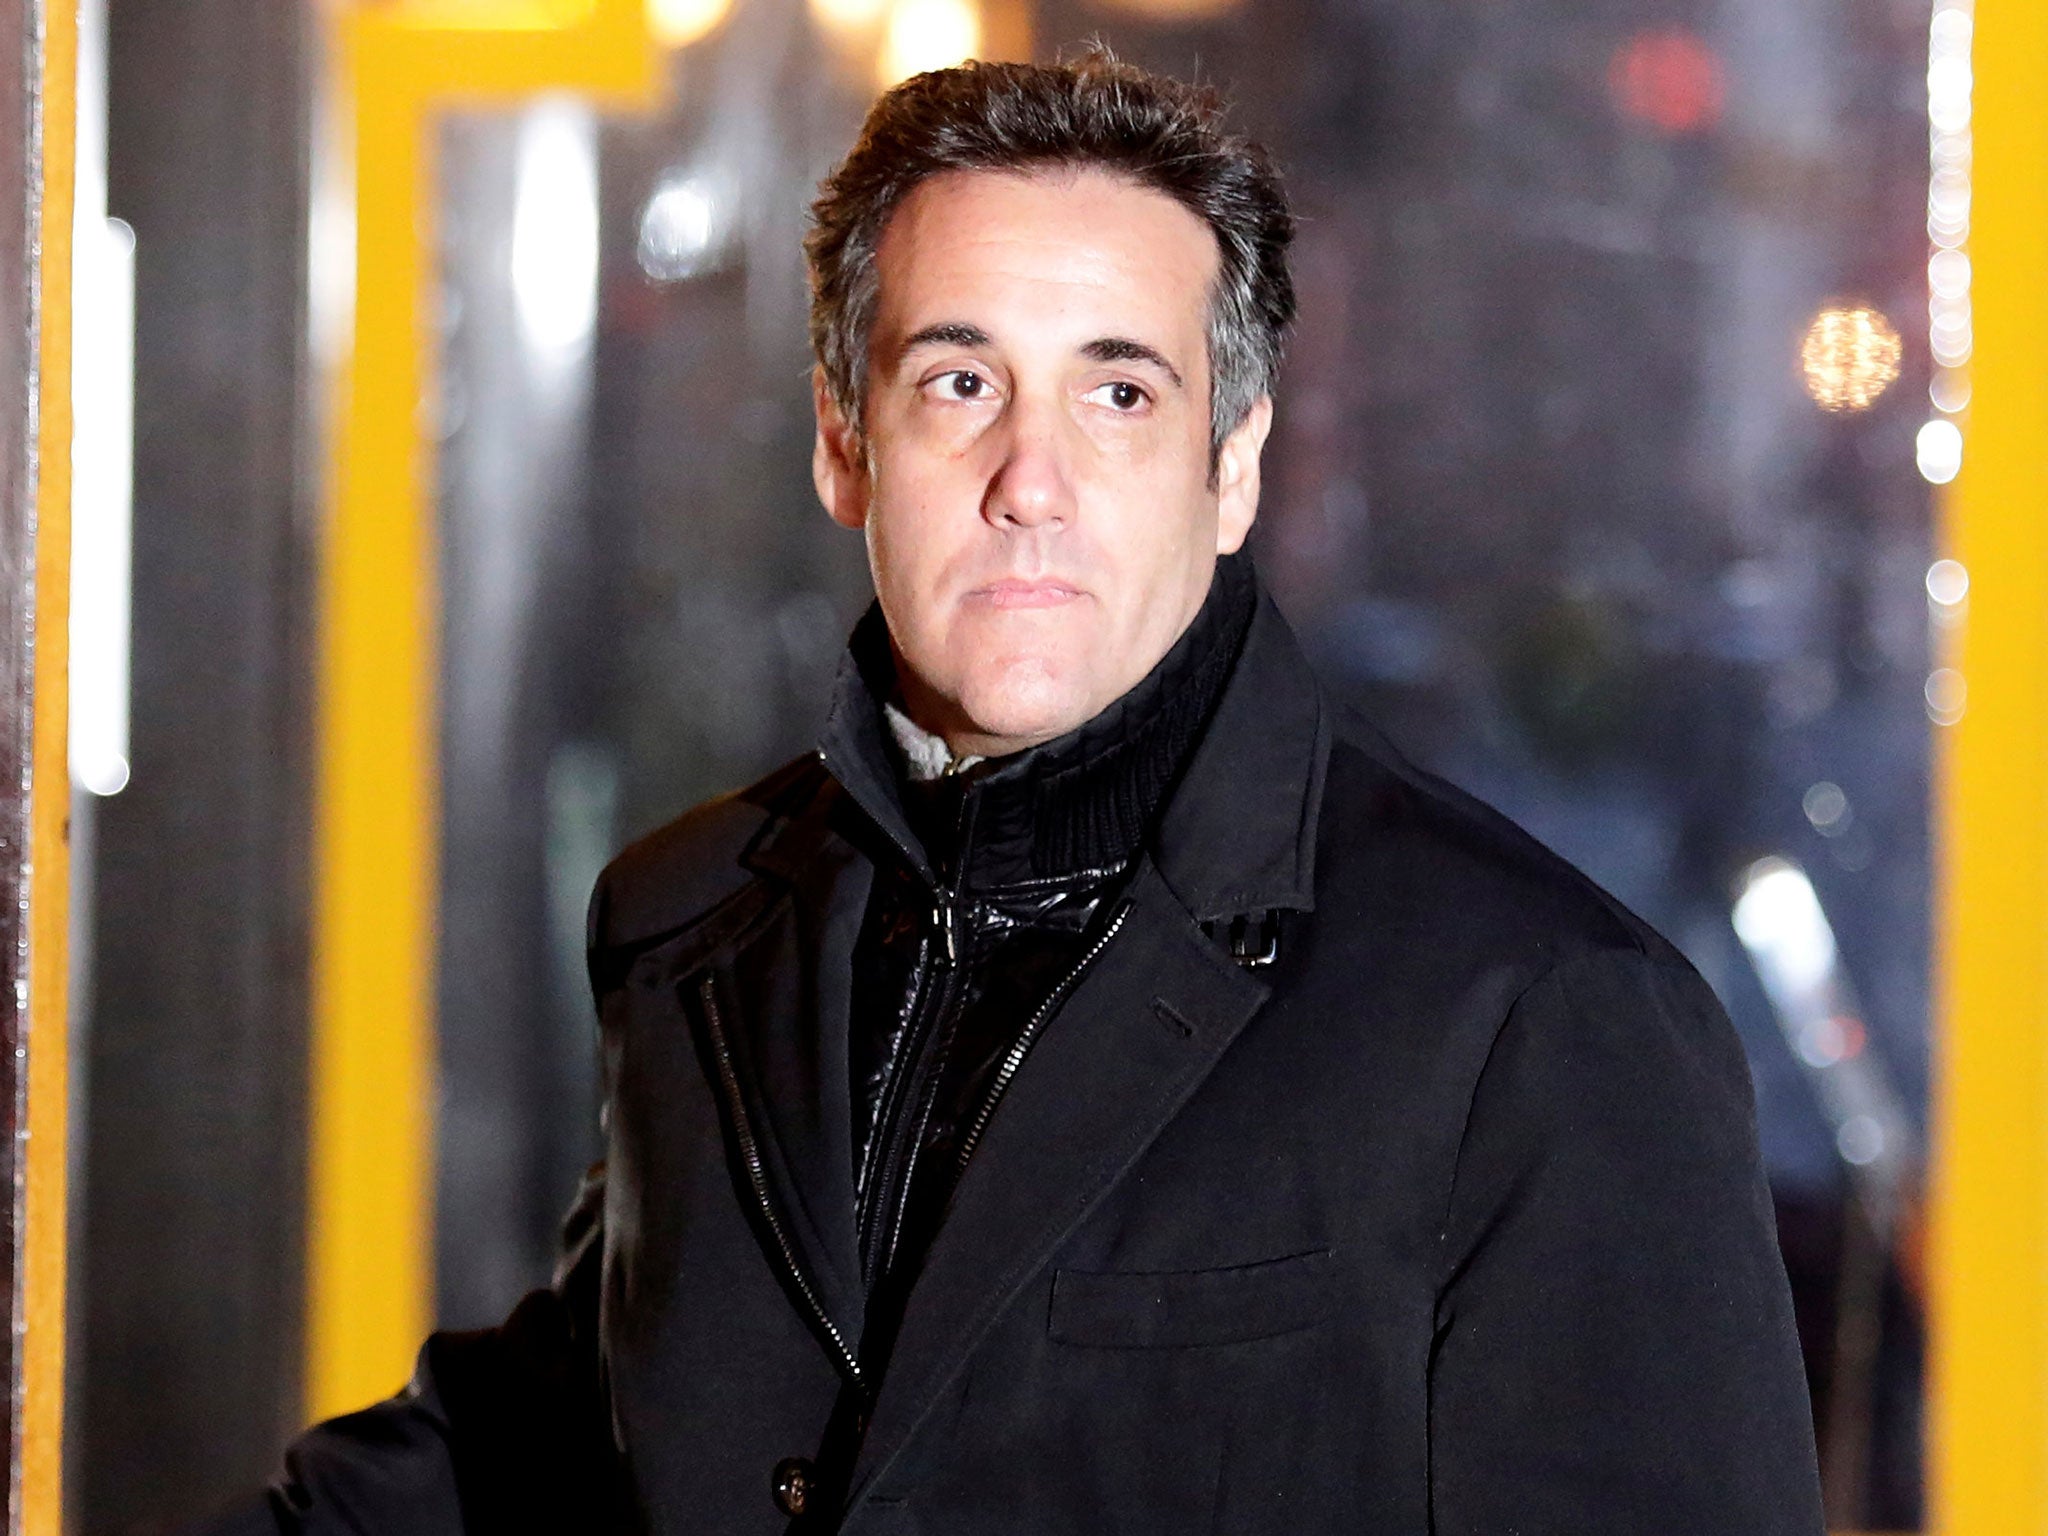 Michael Cohen had predicted in 2019 that Trump will not leave the White House peacefully if voted out in the elections &nbsp;&nbsp;